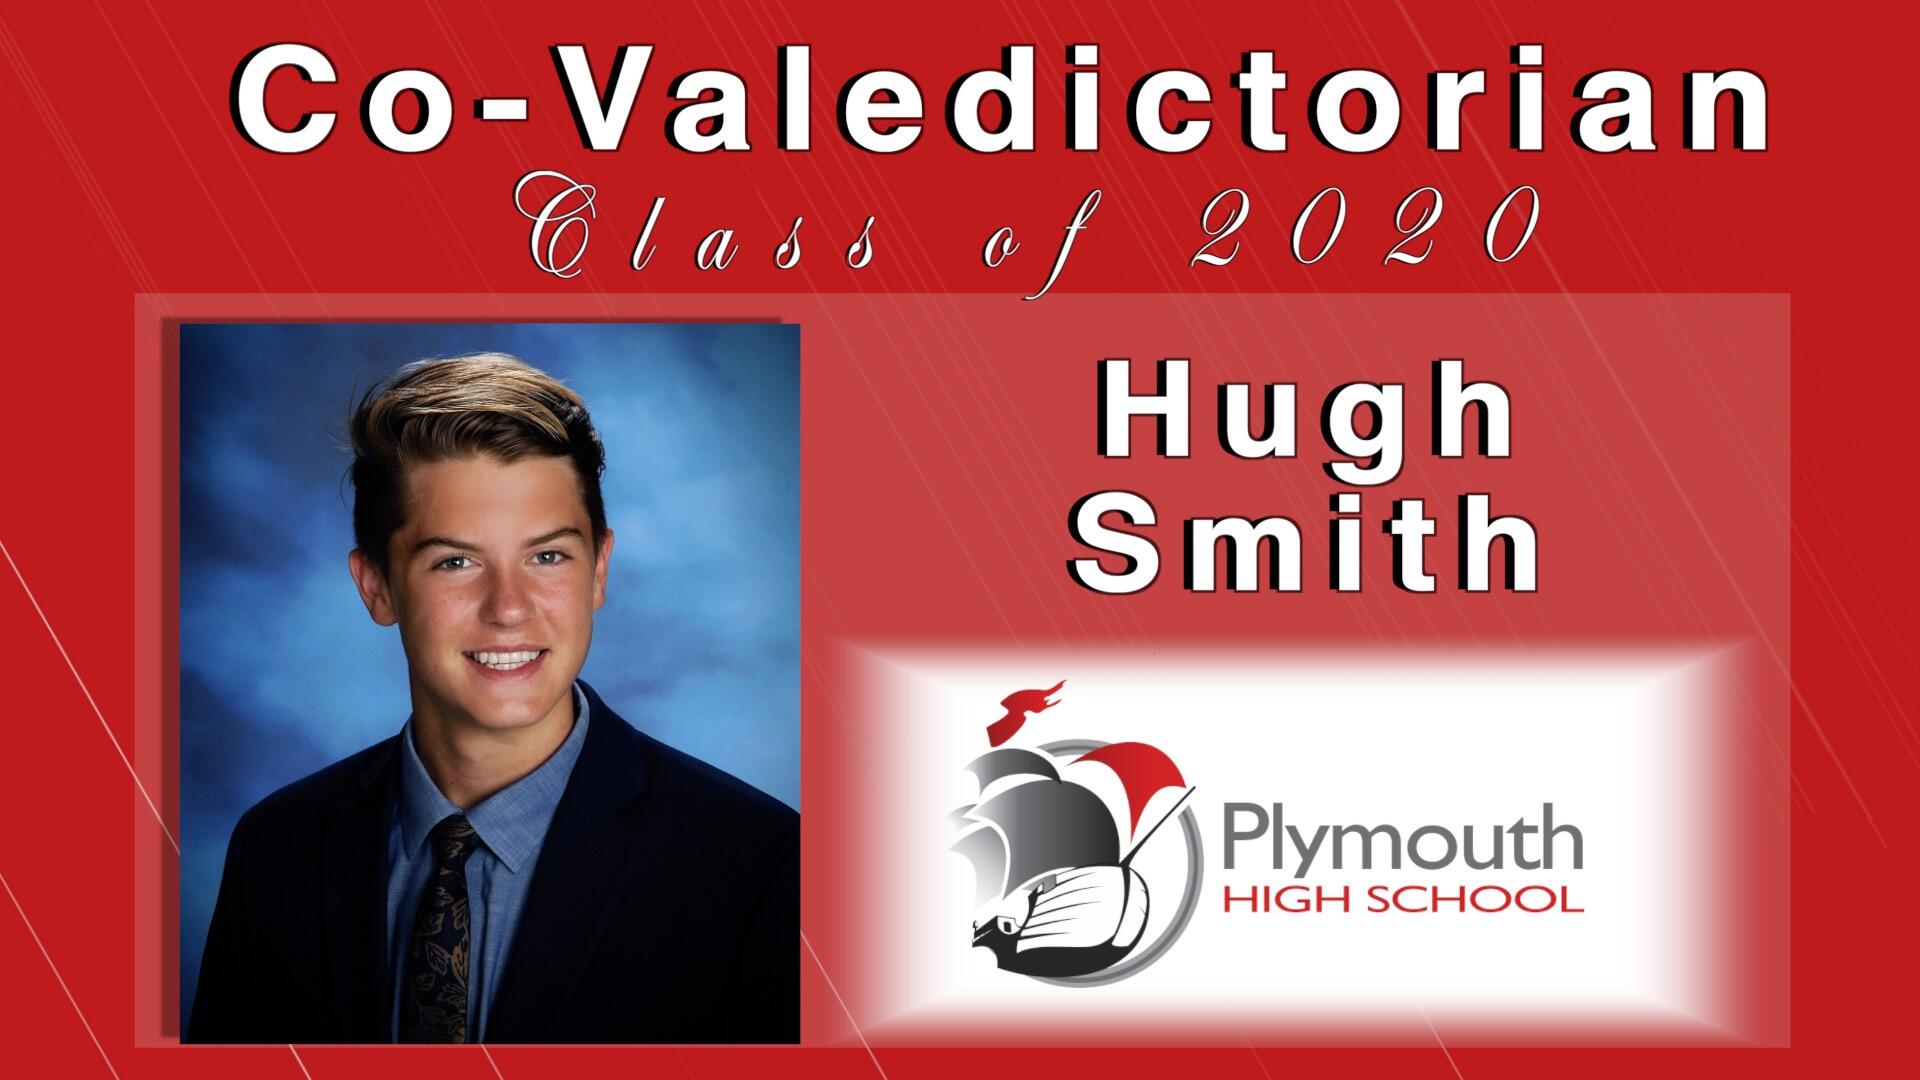 Co-Valedictorian-Class of 2020- Hugh Smith (photo) -Plymouth High School (logo) on red background